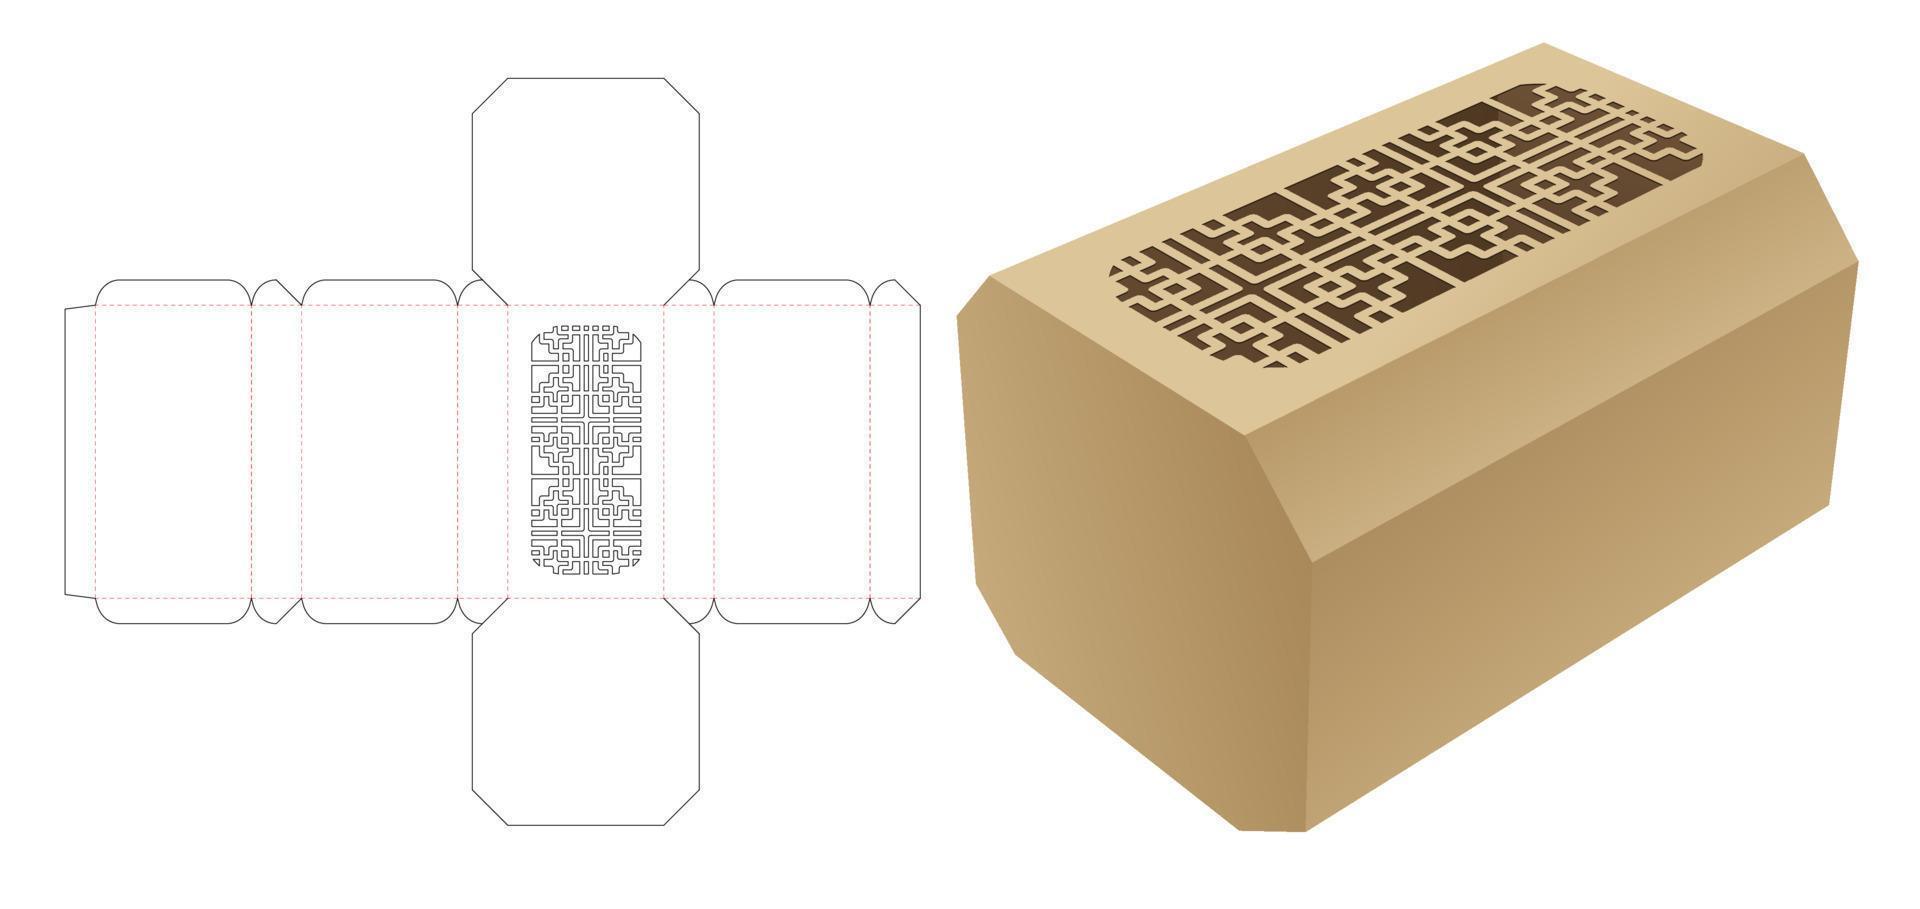 Stenciled pattern octagonal box die cut template and 3D mockup vector